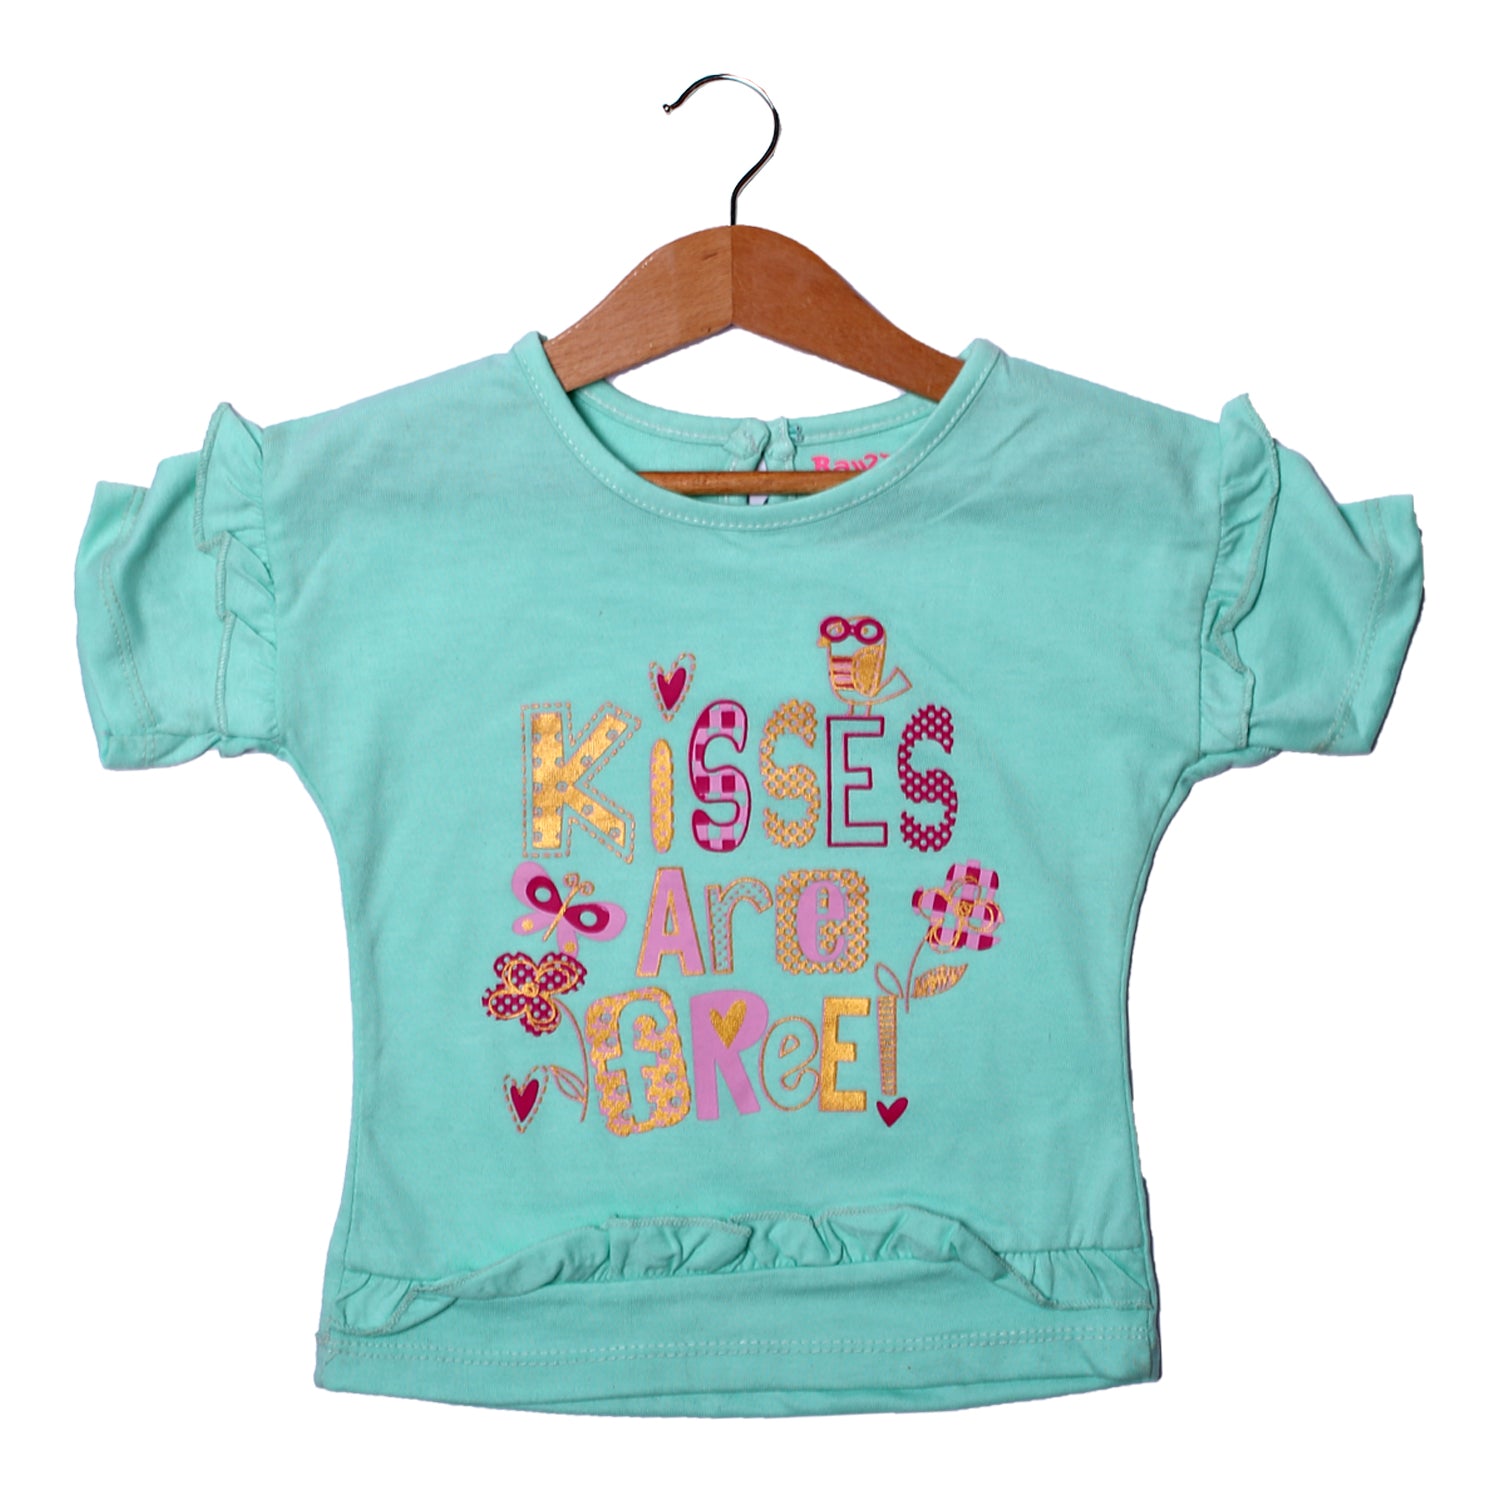 NEW PISTA KISSES ARE FREE PRINTED T-SHIRT TOP FOR GIRLS